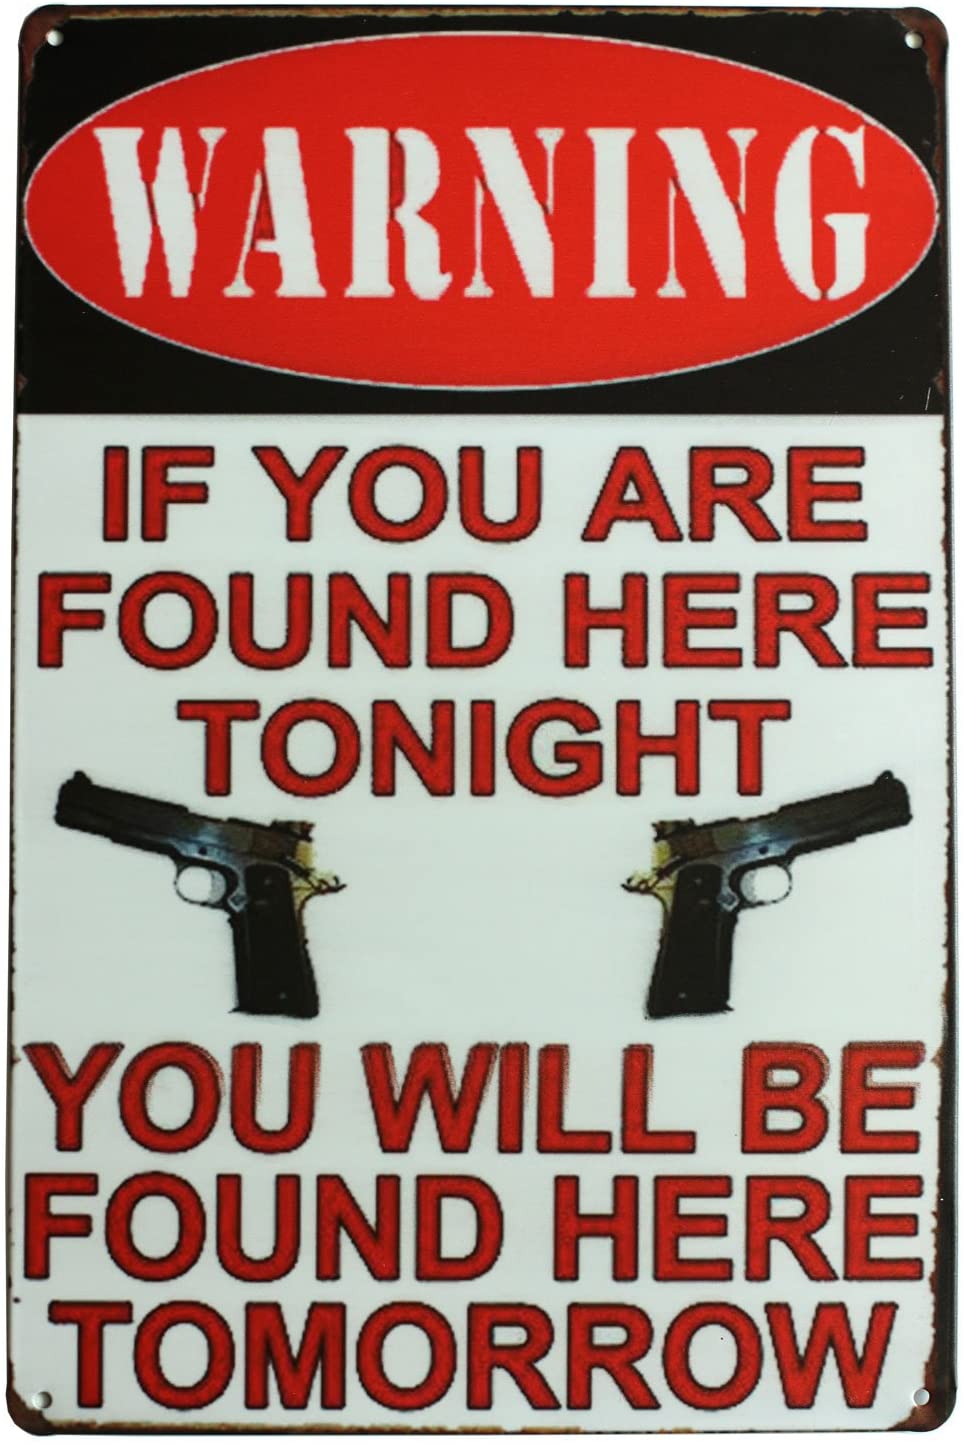 Warning: If you are found here tonight...- antique-style metal sign